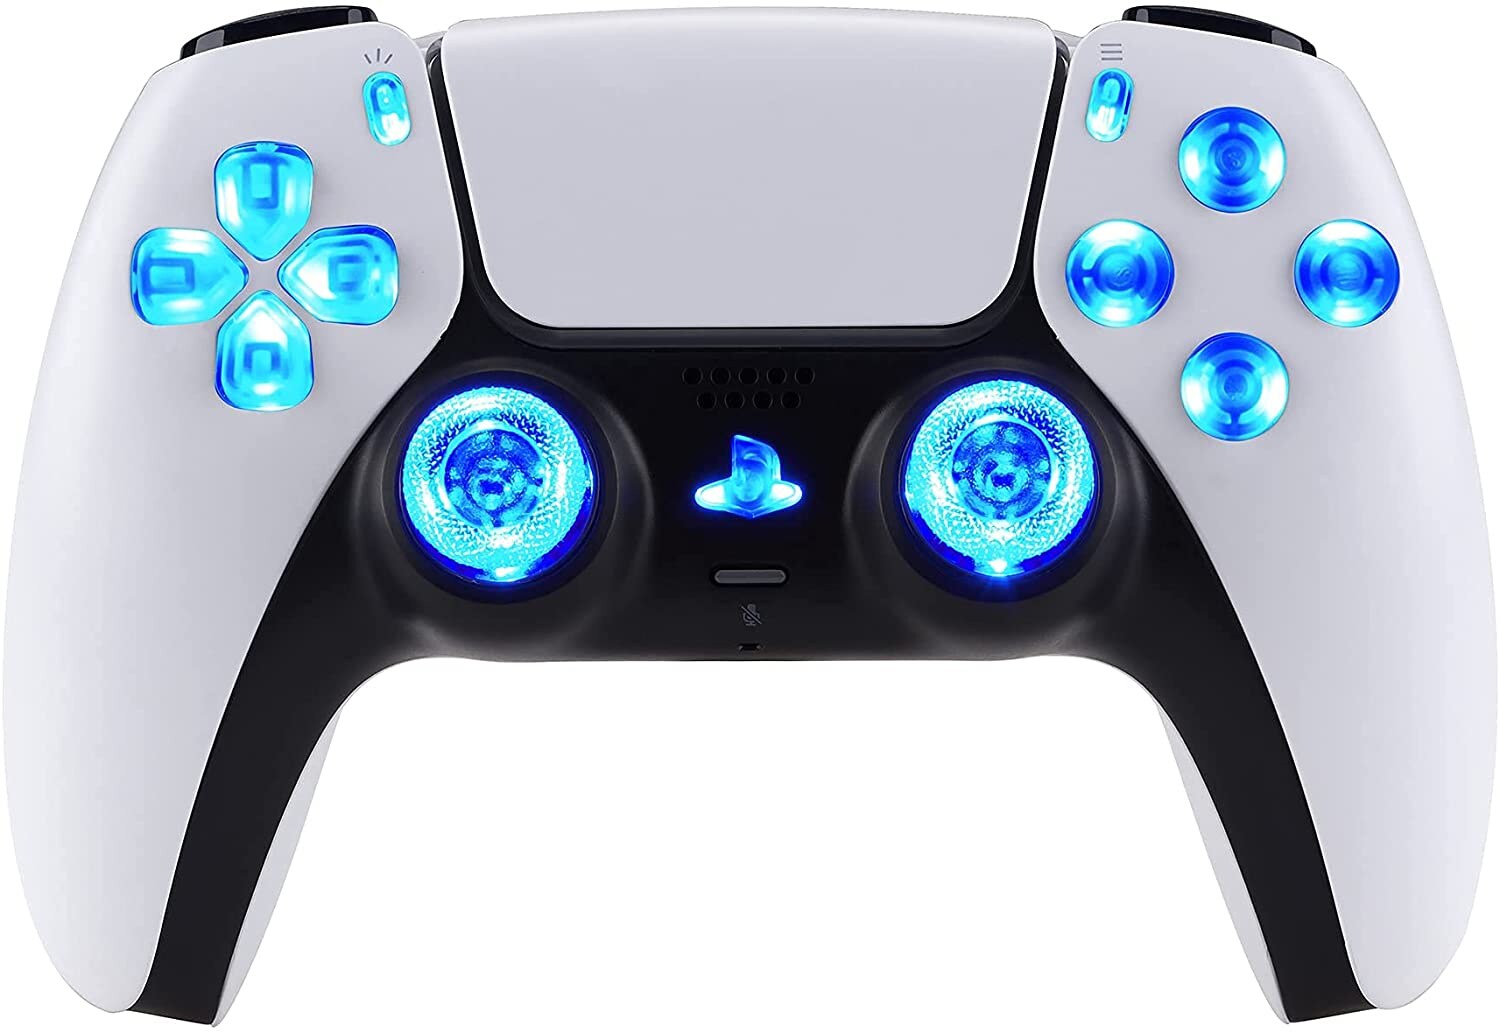 Multi-Colors luminated D-pad Thumbstick Share Option Home Face Buttons for PS5 Controller BDM-010 7 Colors DTF LED Kit Gaming - 6